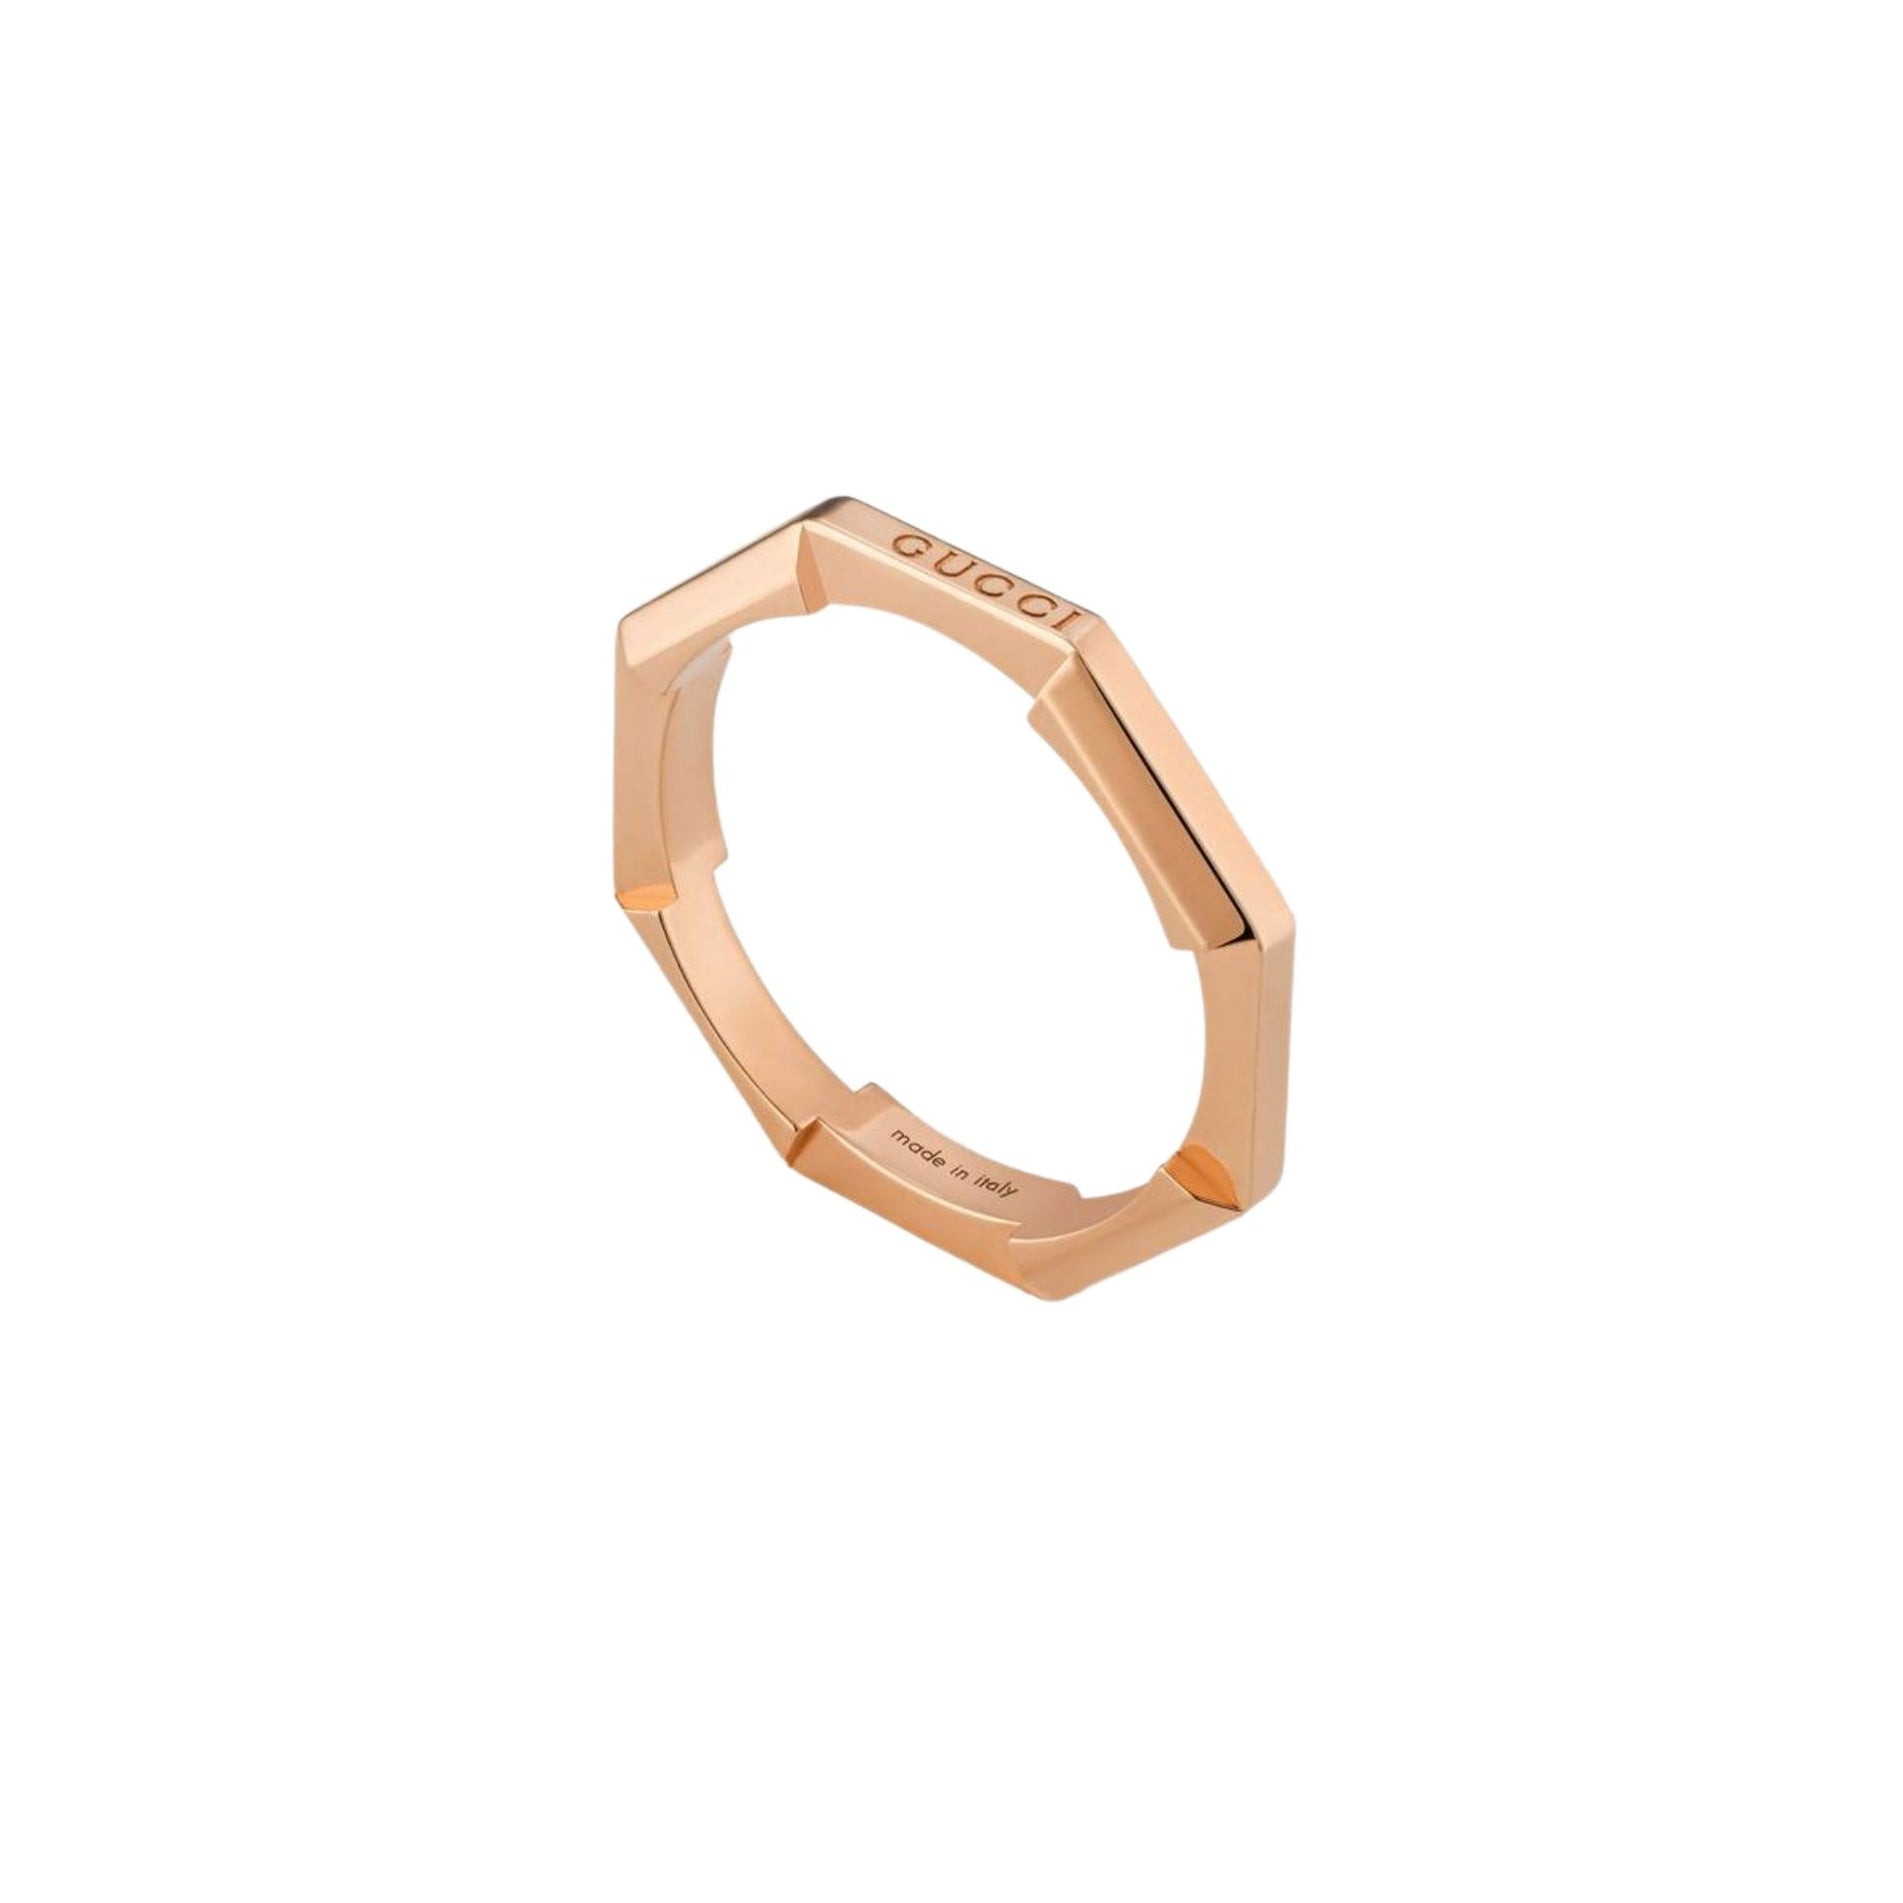 Gucci Link to Love Ring in 18k Rose Gold (3mm) - Orsini Jewellers NZ